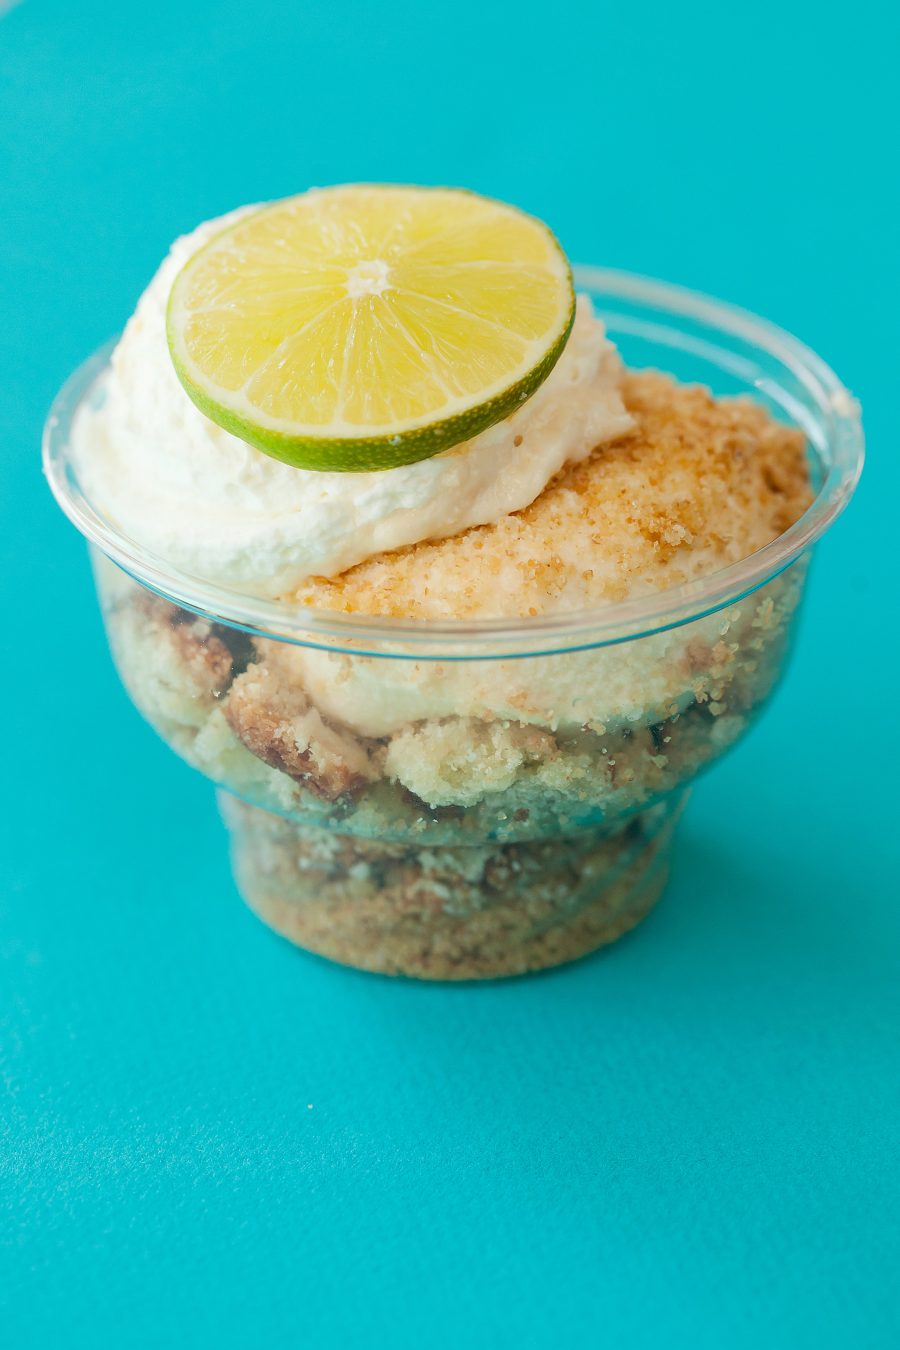 Key Lime Trifle⚠️FUTURE DATE PICK-UP⚠️❄KEEP COLD❄